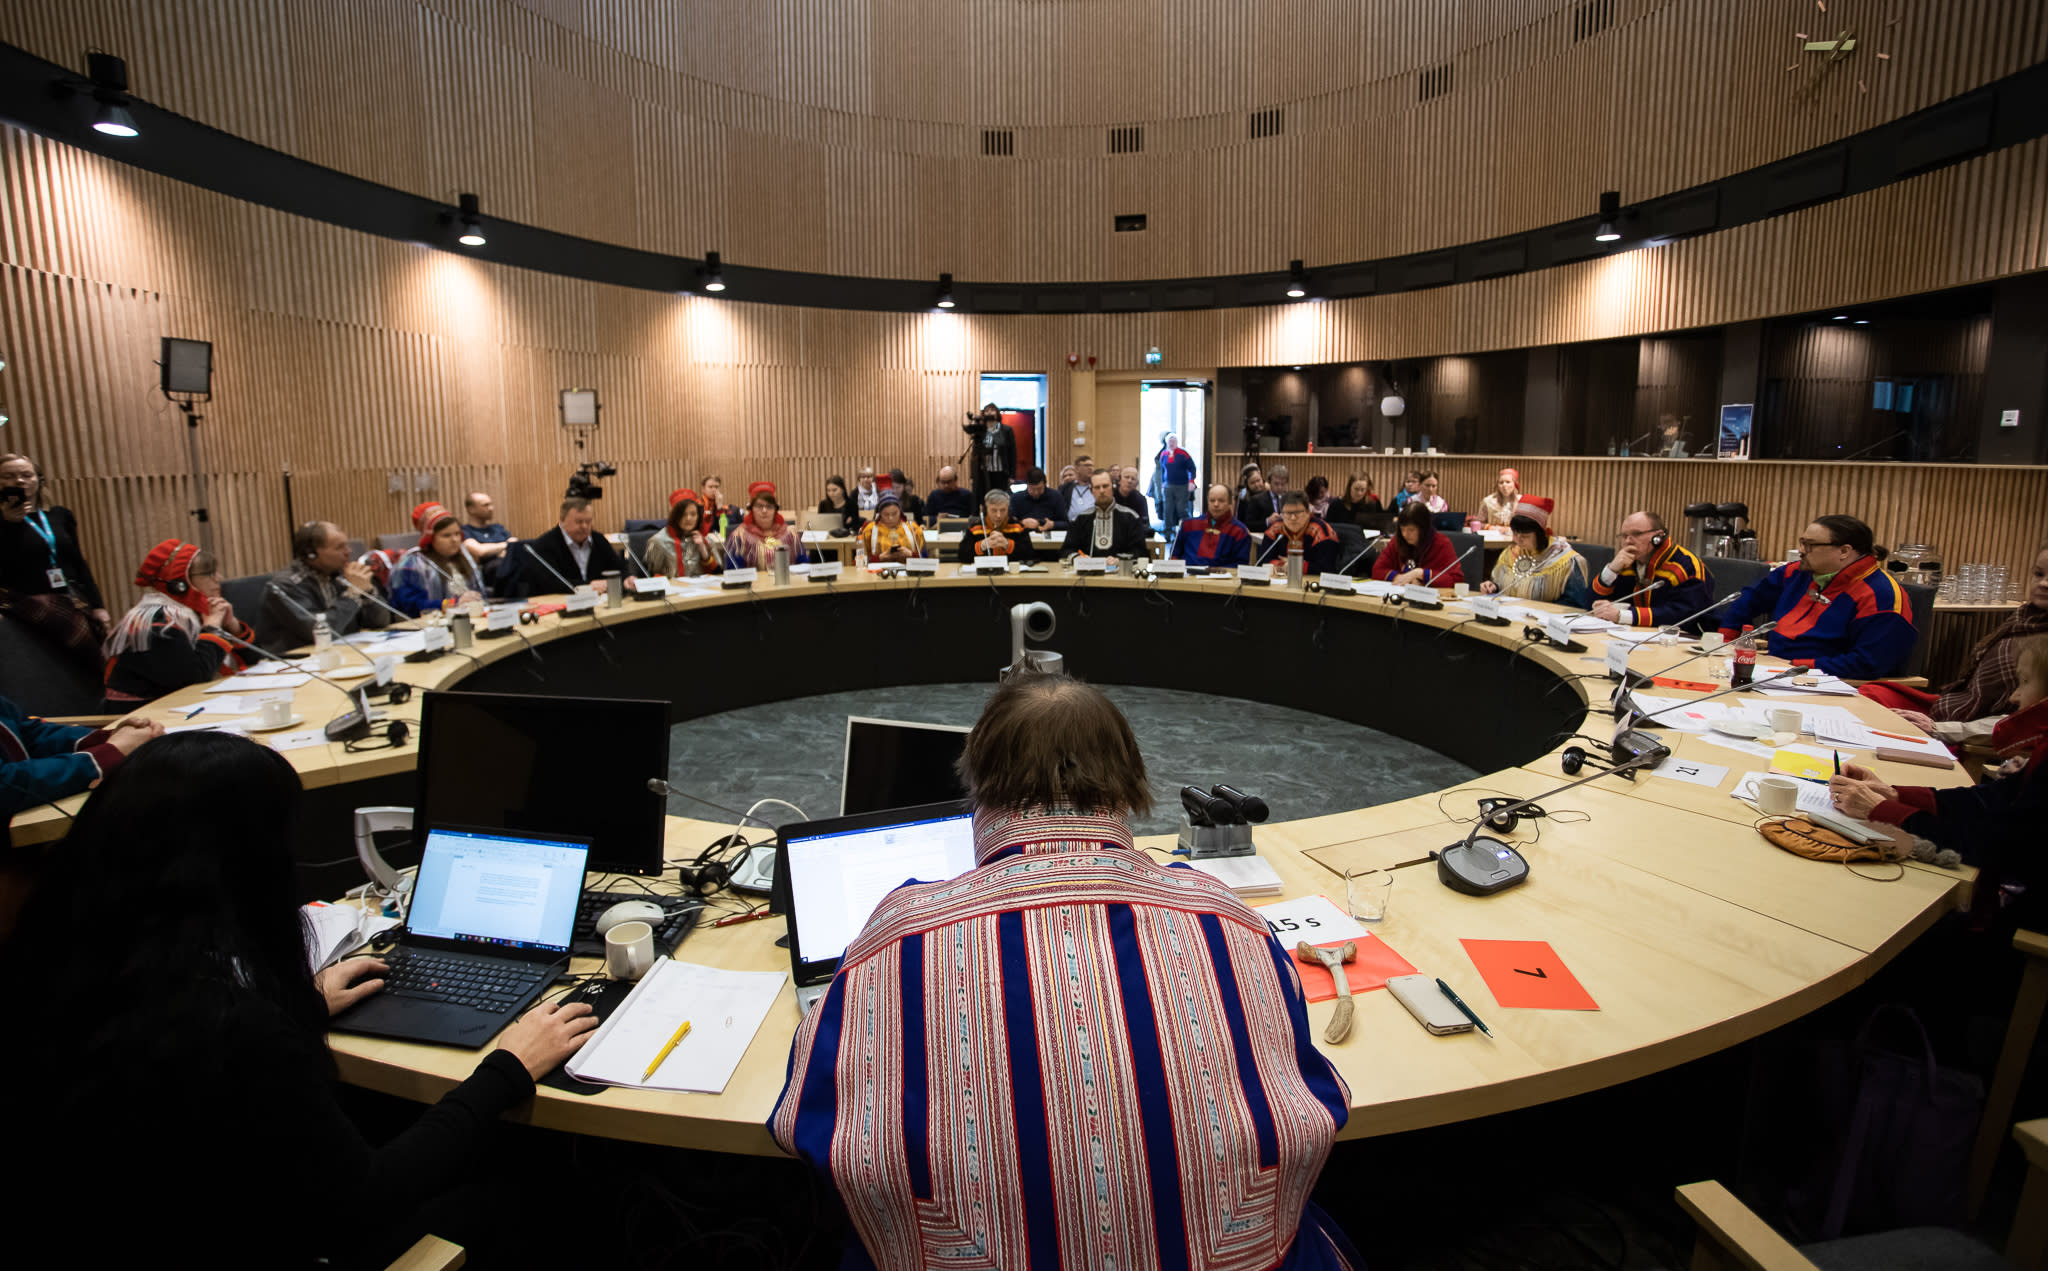 The law of the Sámi assemblies was delayed again because the center takes more time